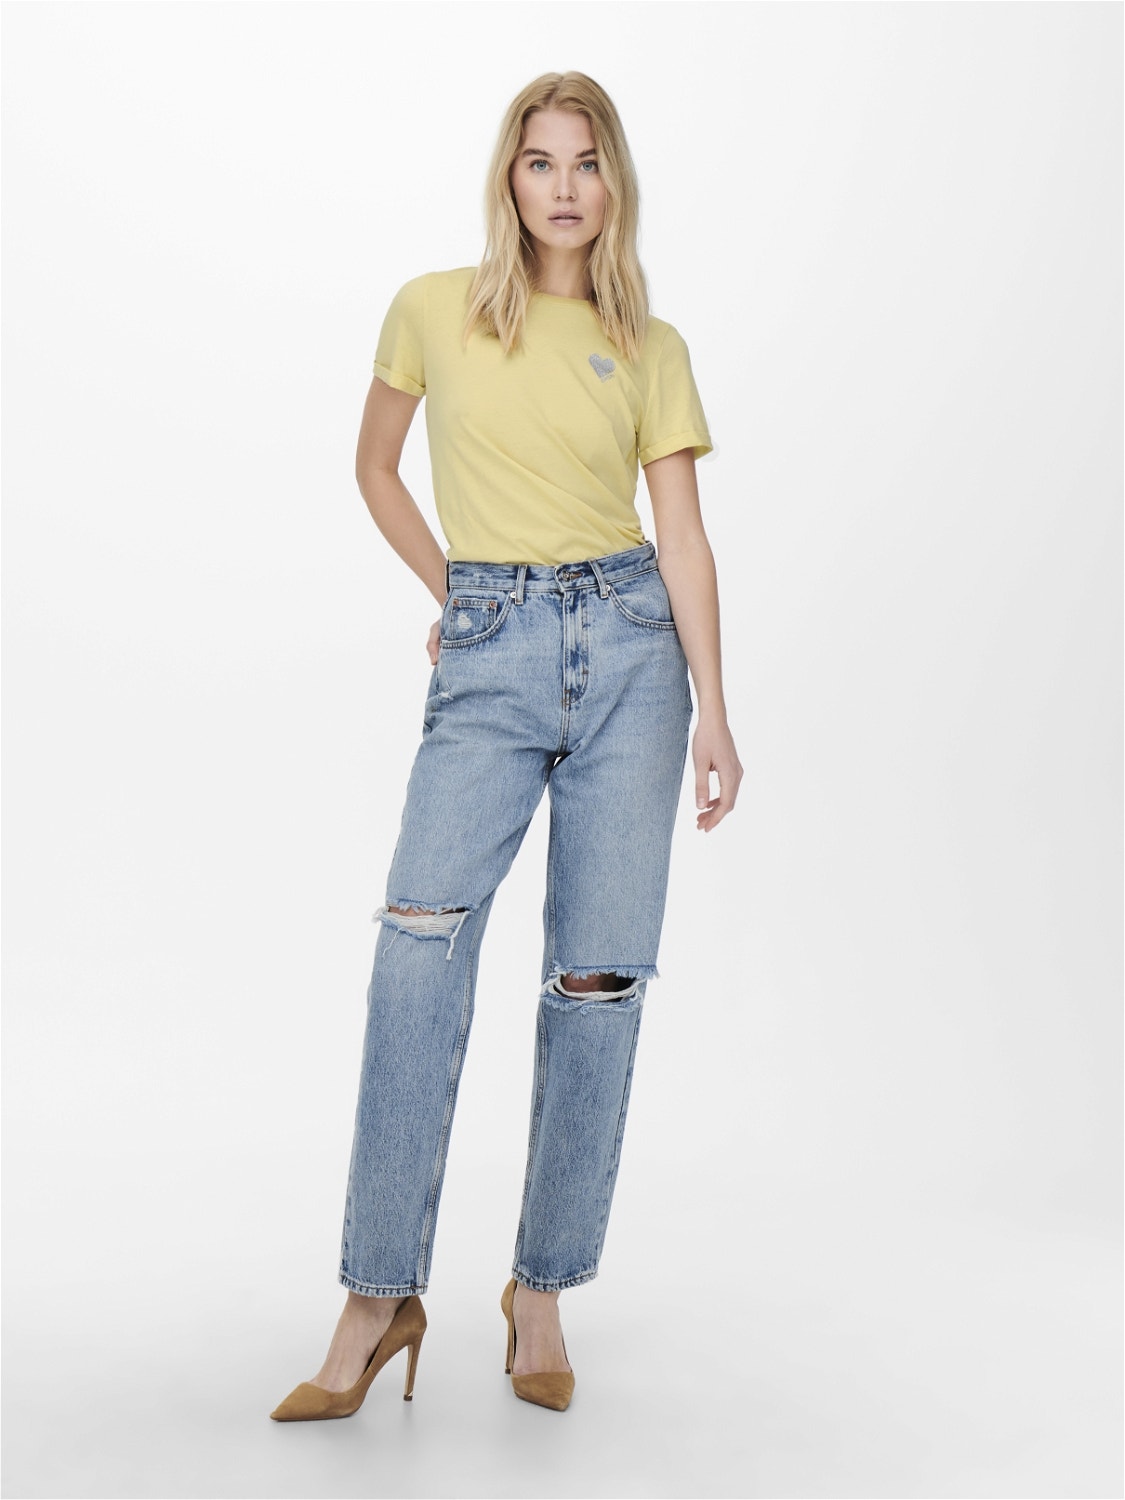 ONLY Hartjesprint Top -Straw - 15244714